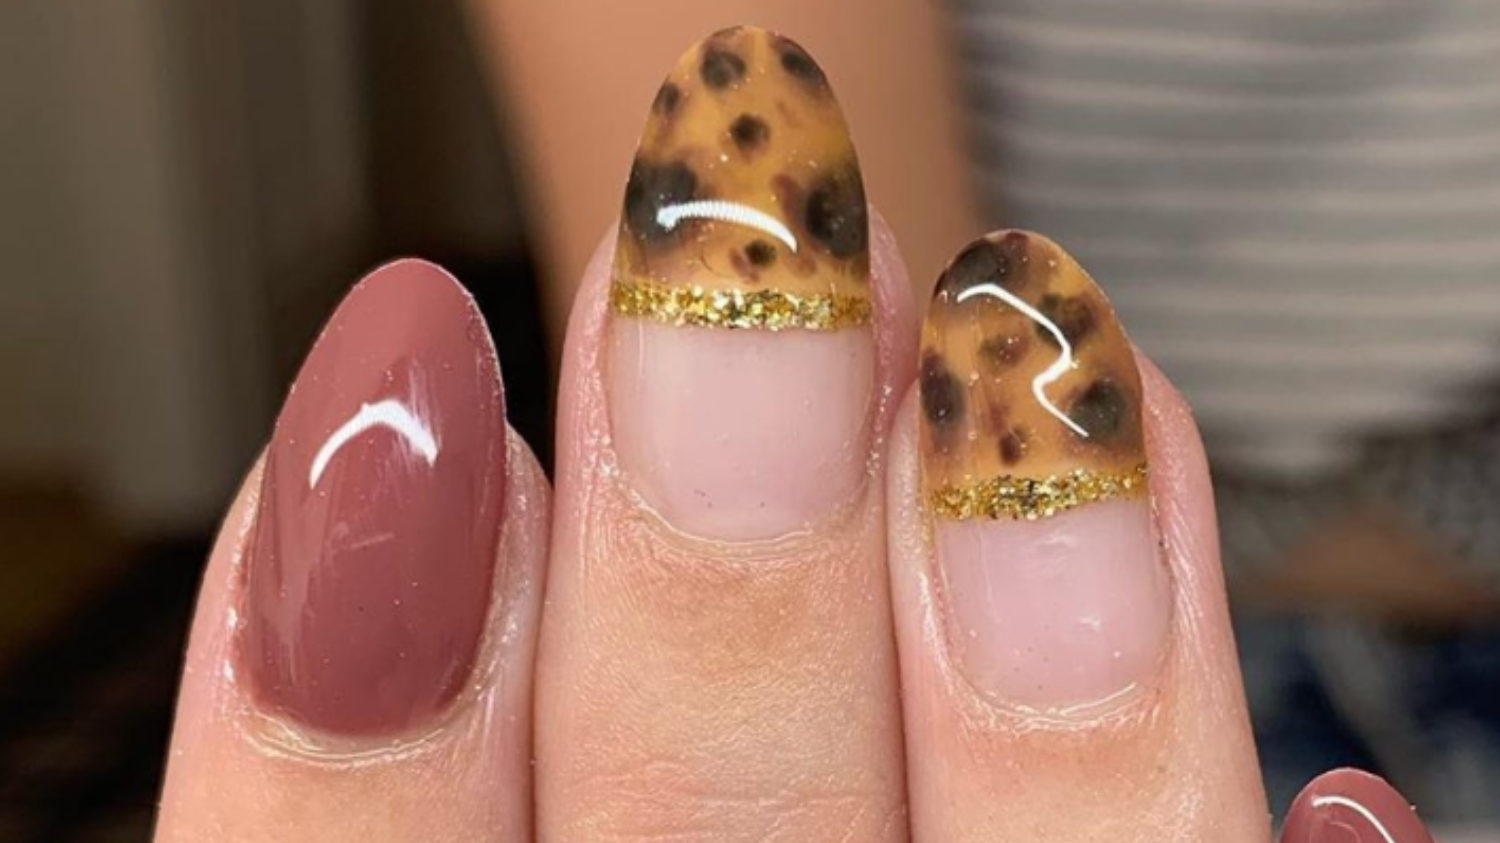 10. Tortoise Shell Nail Art with Foil - wide 4